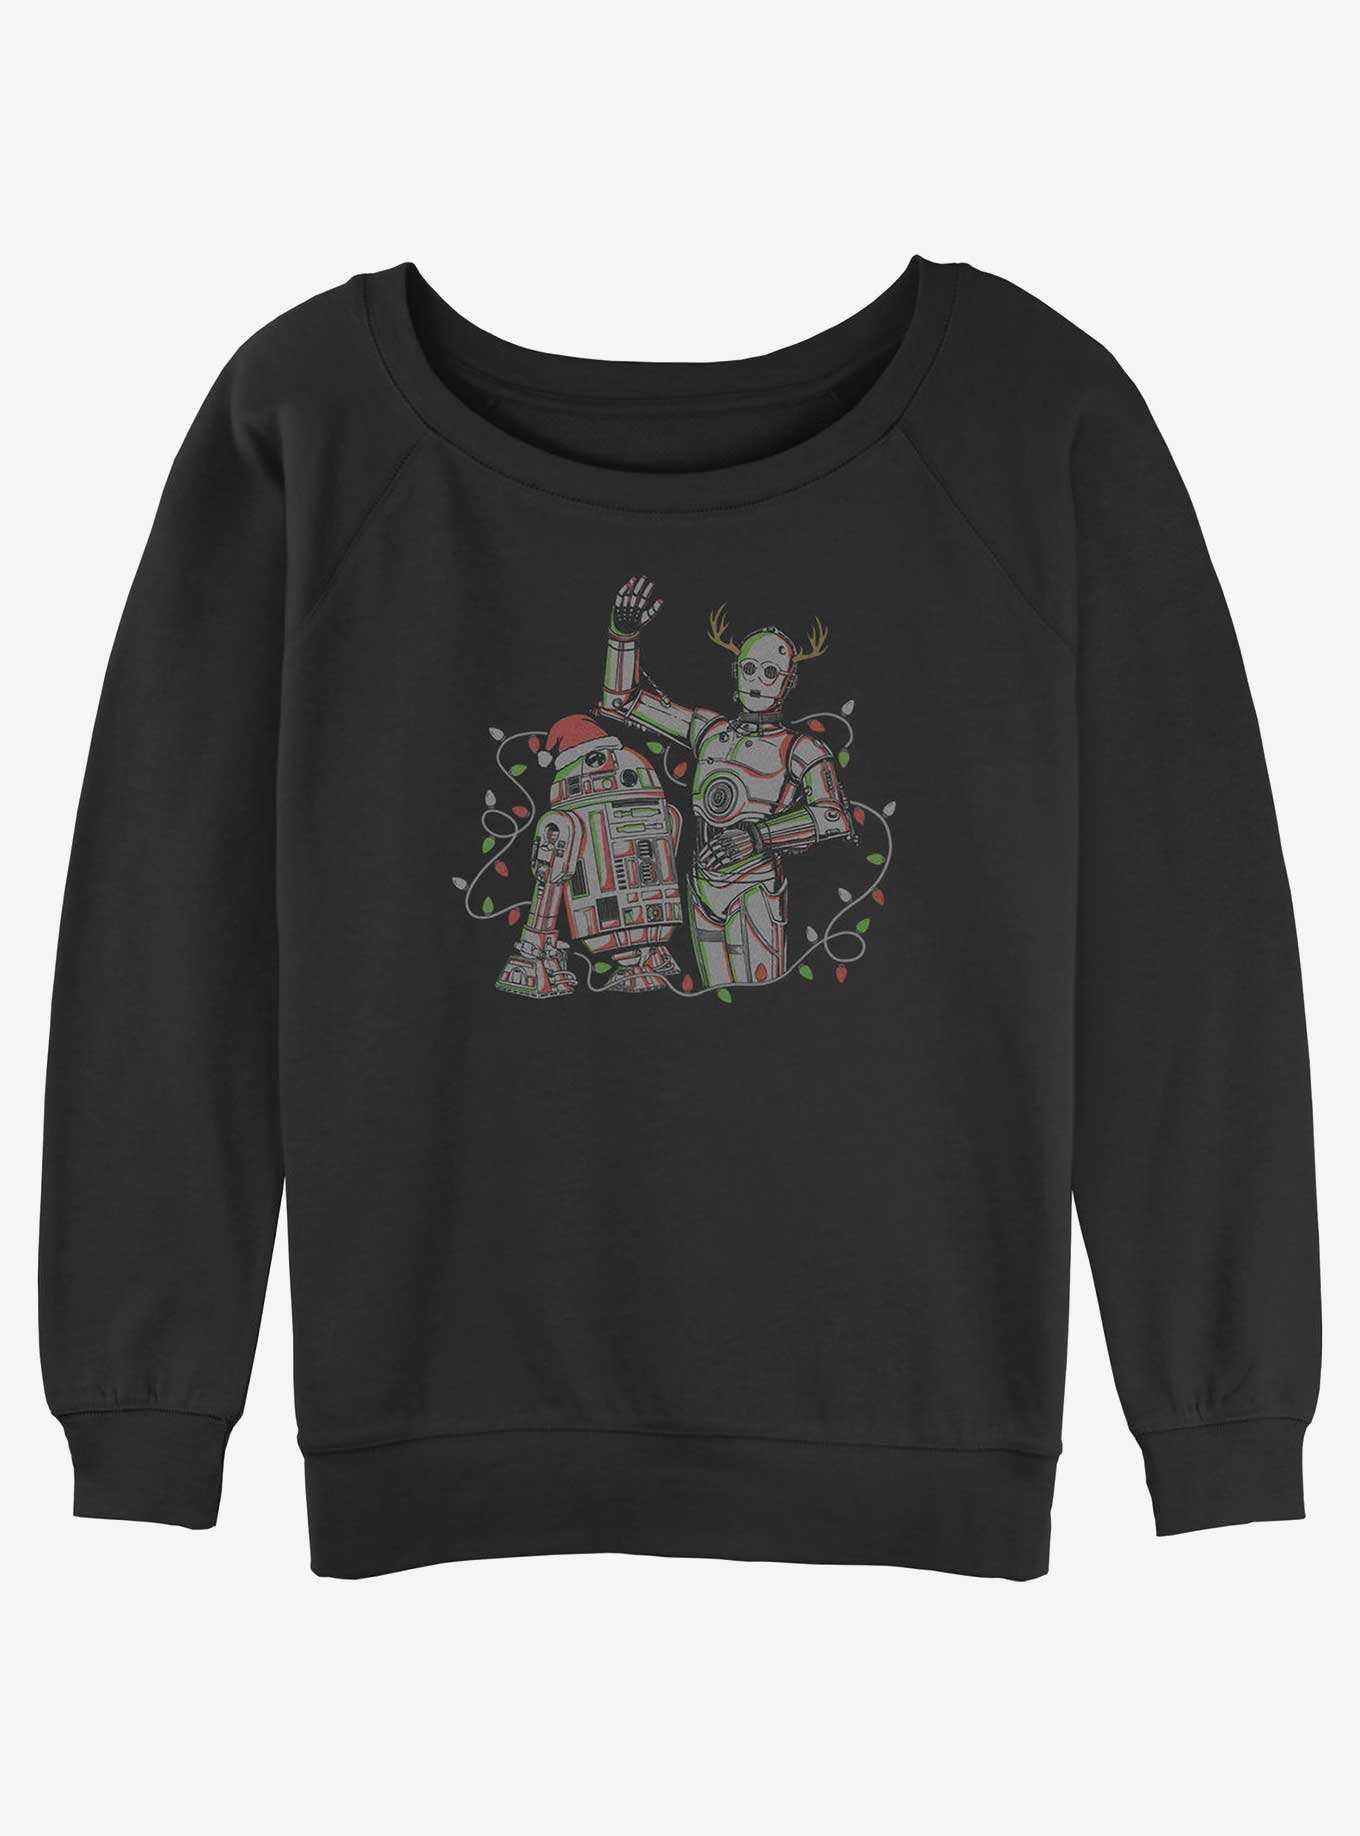 Star Wars Holiday Droids R2-D2 and C-3PO Womens Slouchy Sweatshirt, , hi-res